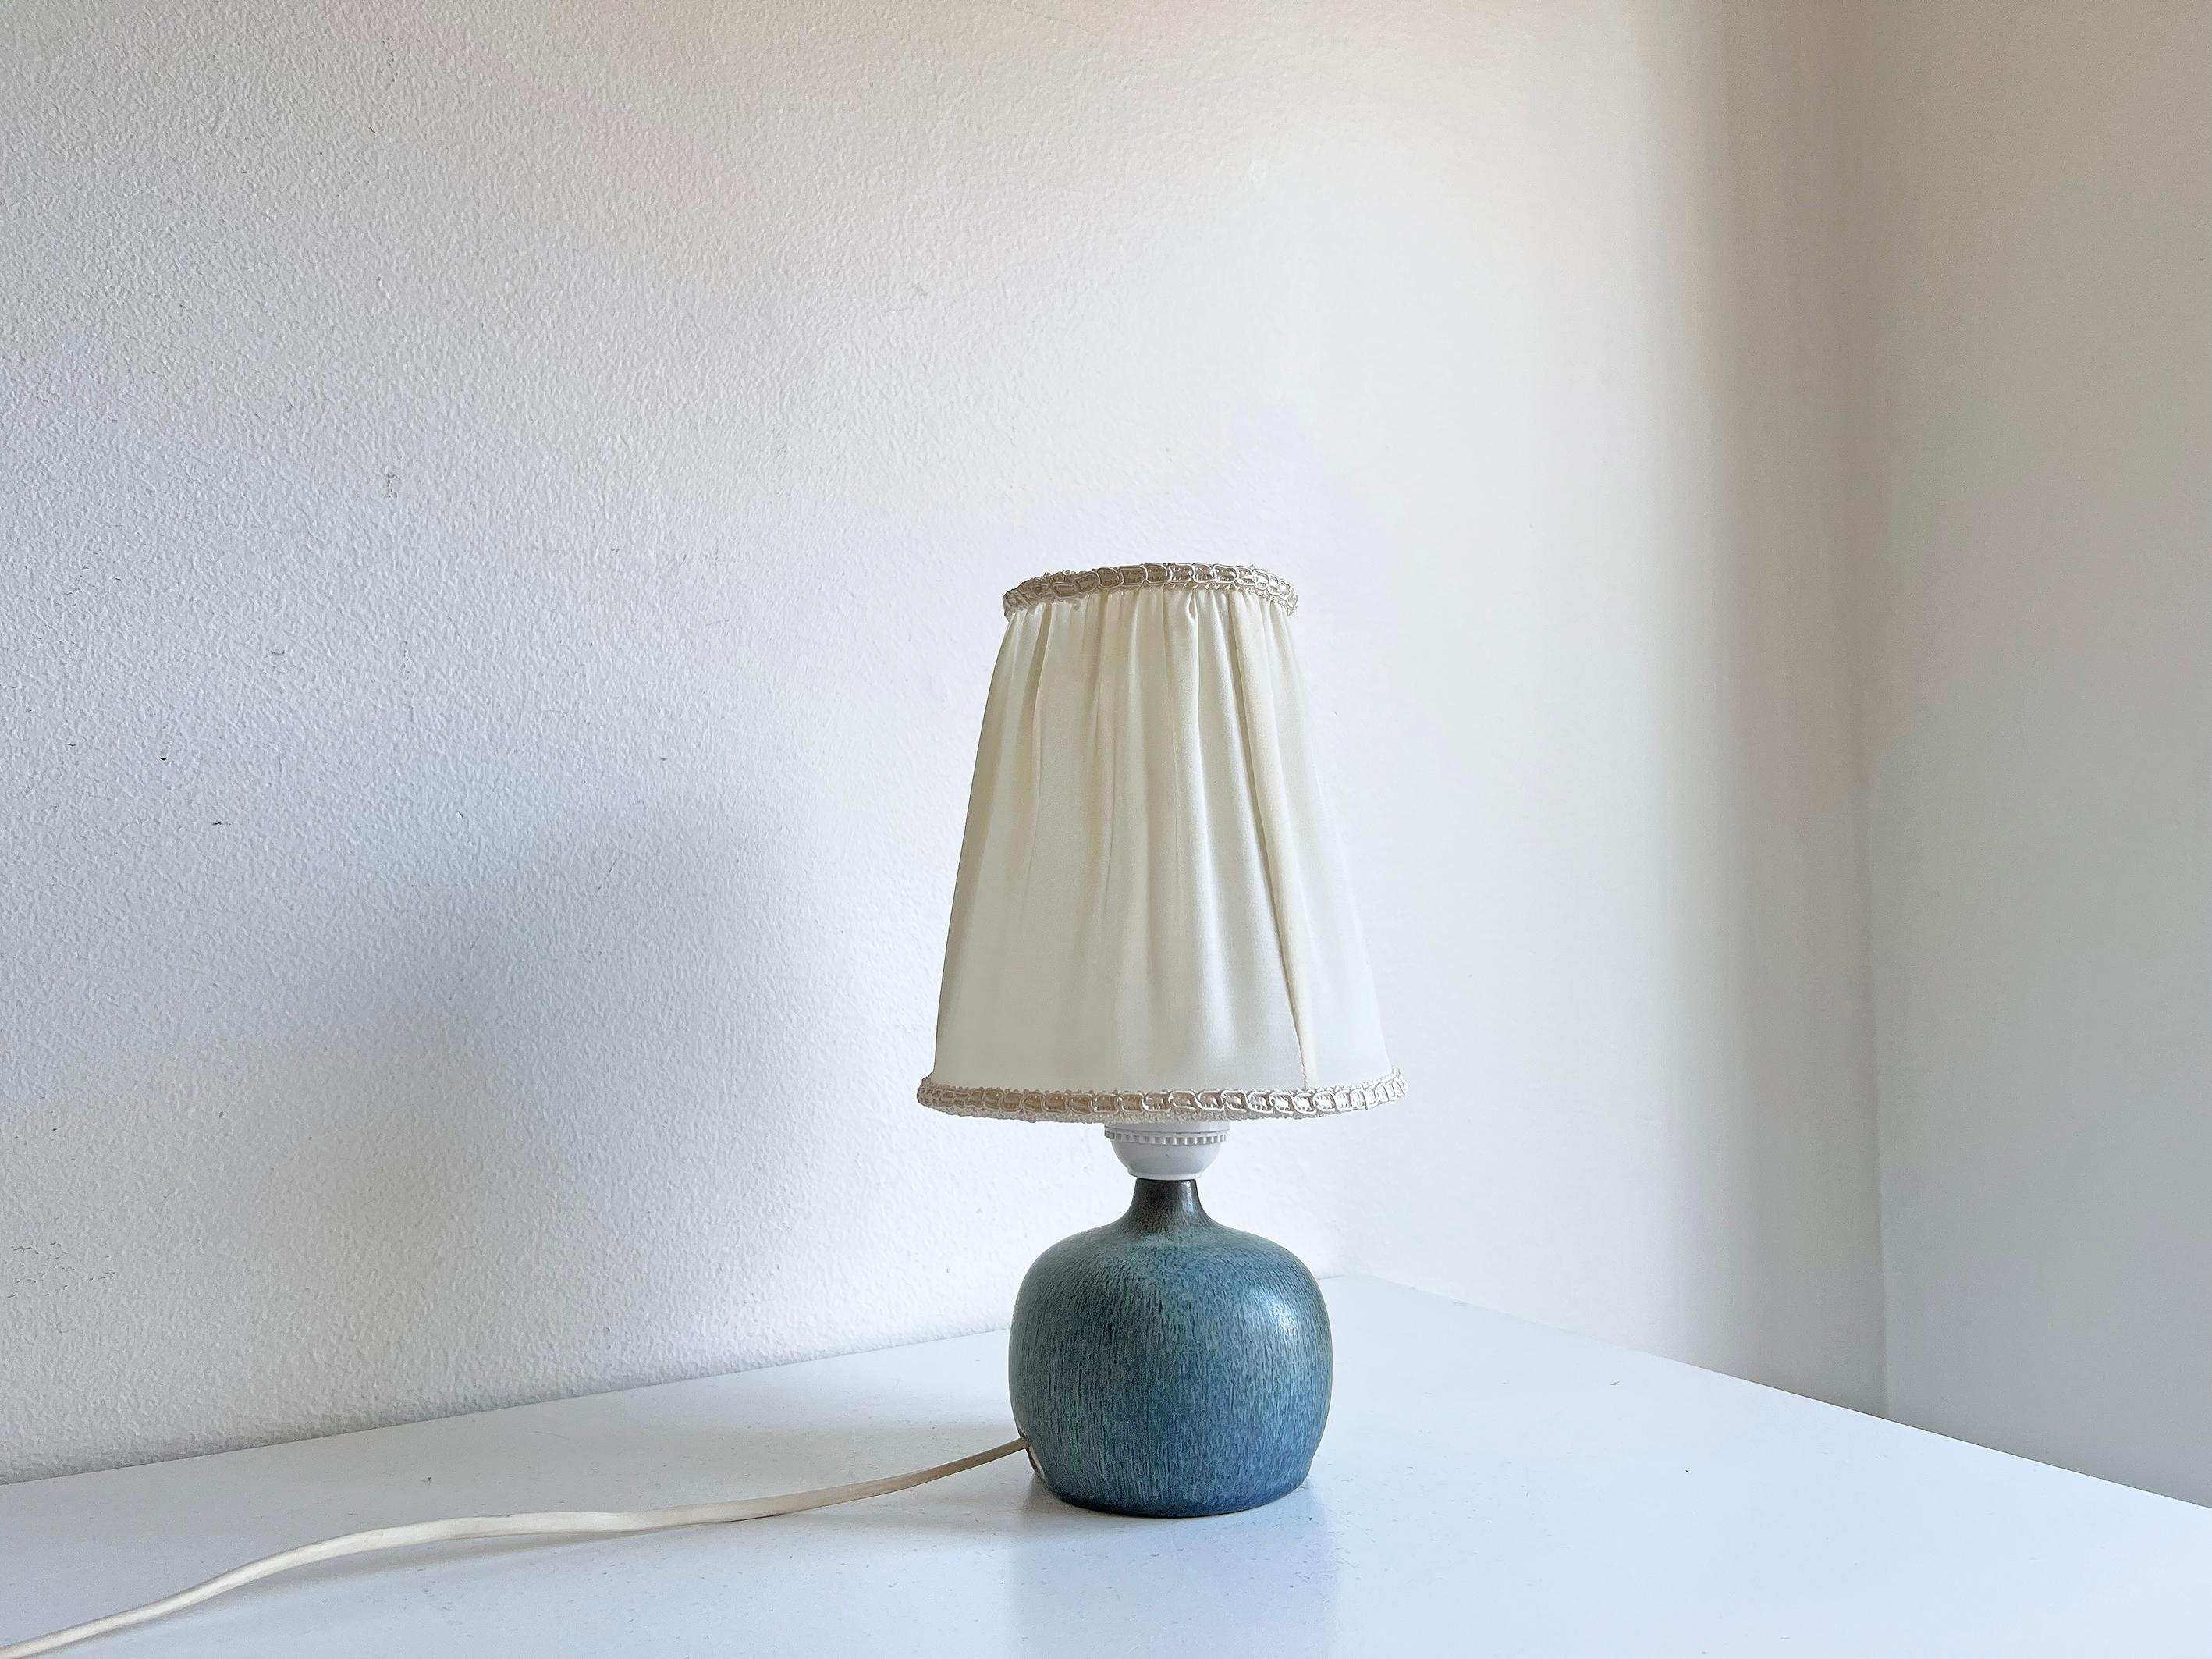 Elegant small table lamp in stoneware by Gunnar Nylund, produced in Sweden by Rörstrand during the 1940-50s.
The shade is not included.